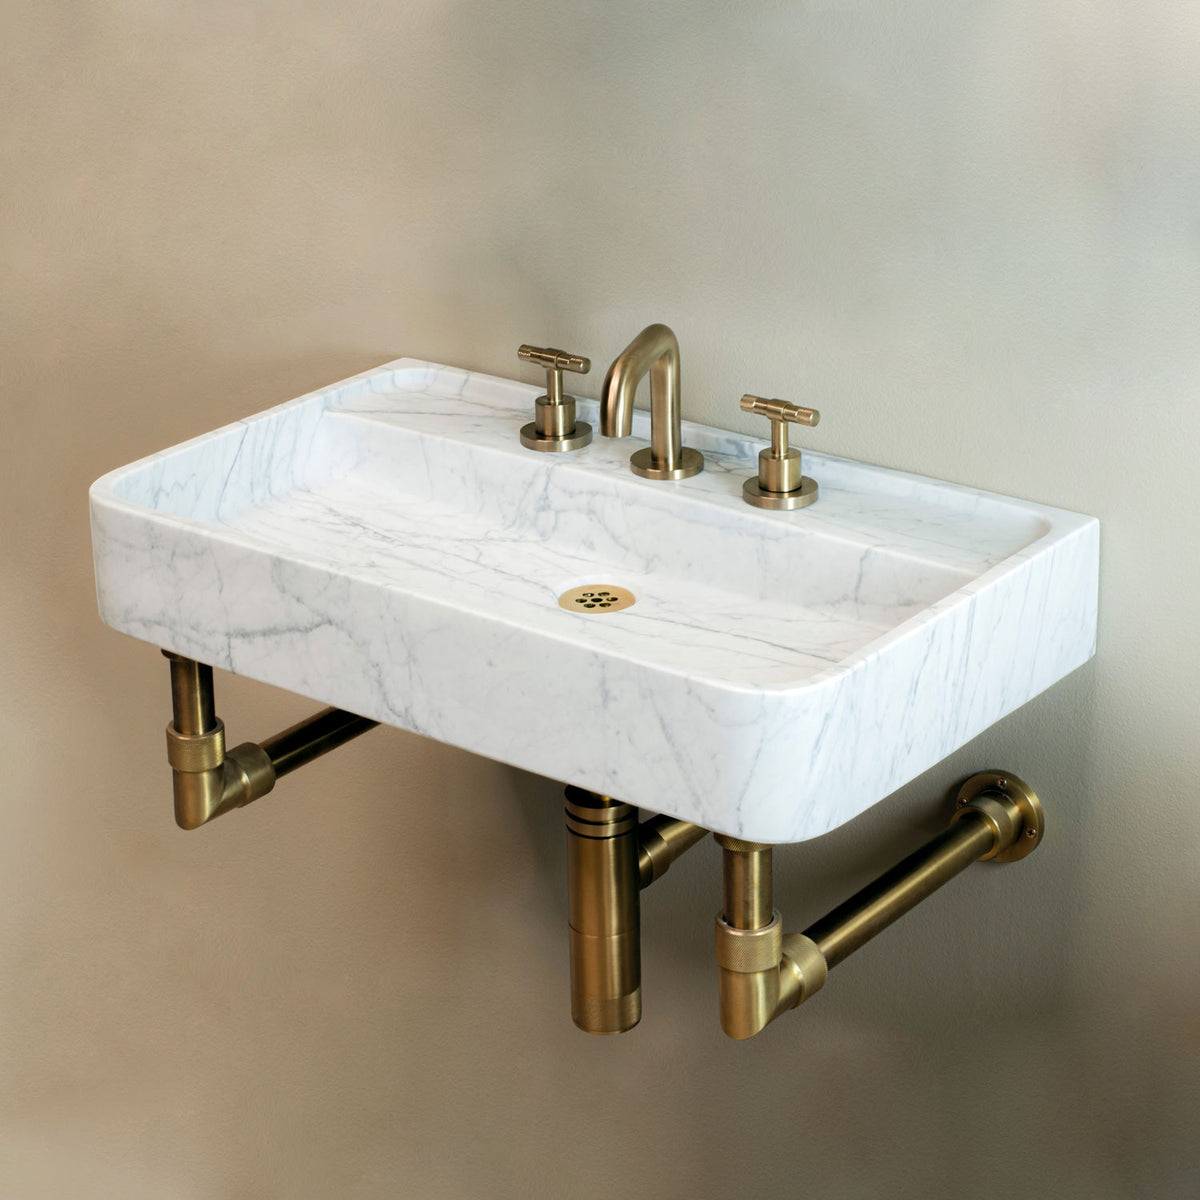 Carrara Marble Lembre bath sink on Elemental Classic wall unit in aged brass image 2 of 4